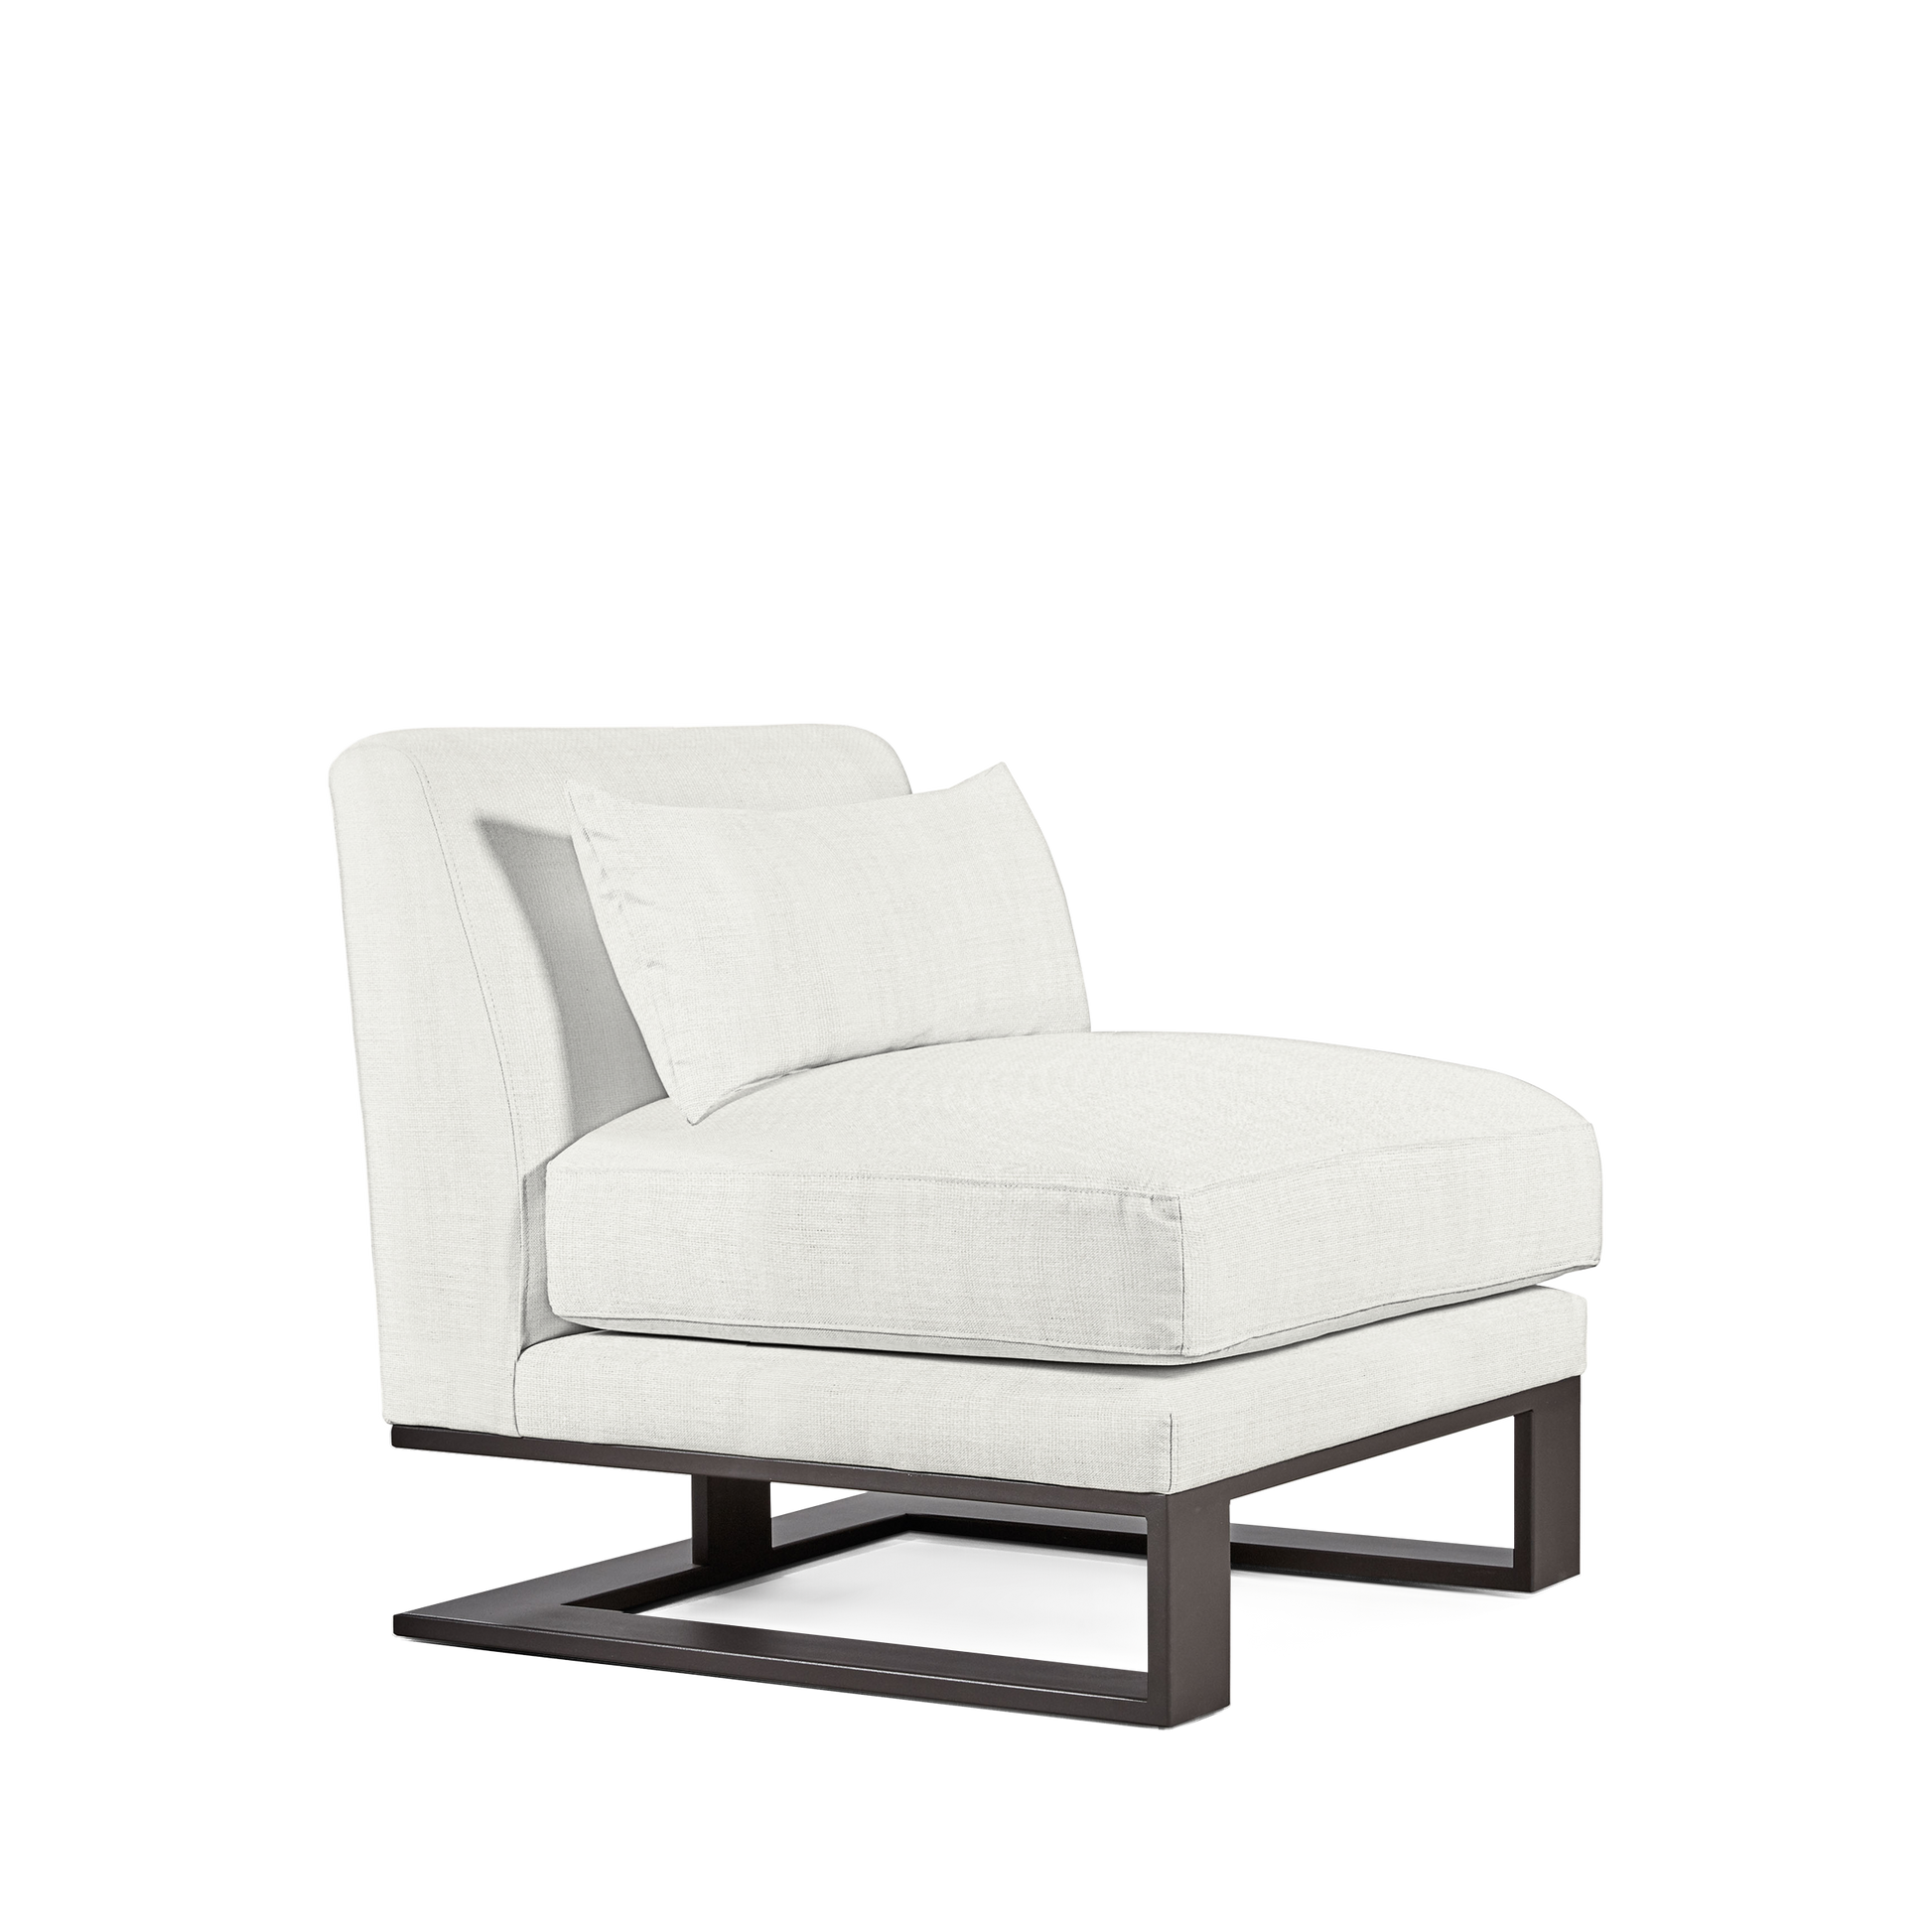 Alpes armchair with Rocco white textile and moka wood legs 